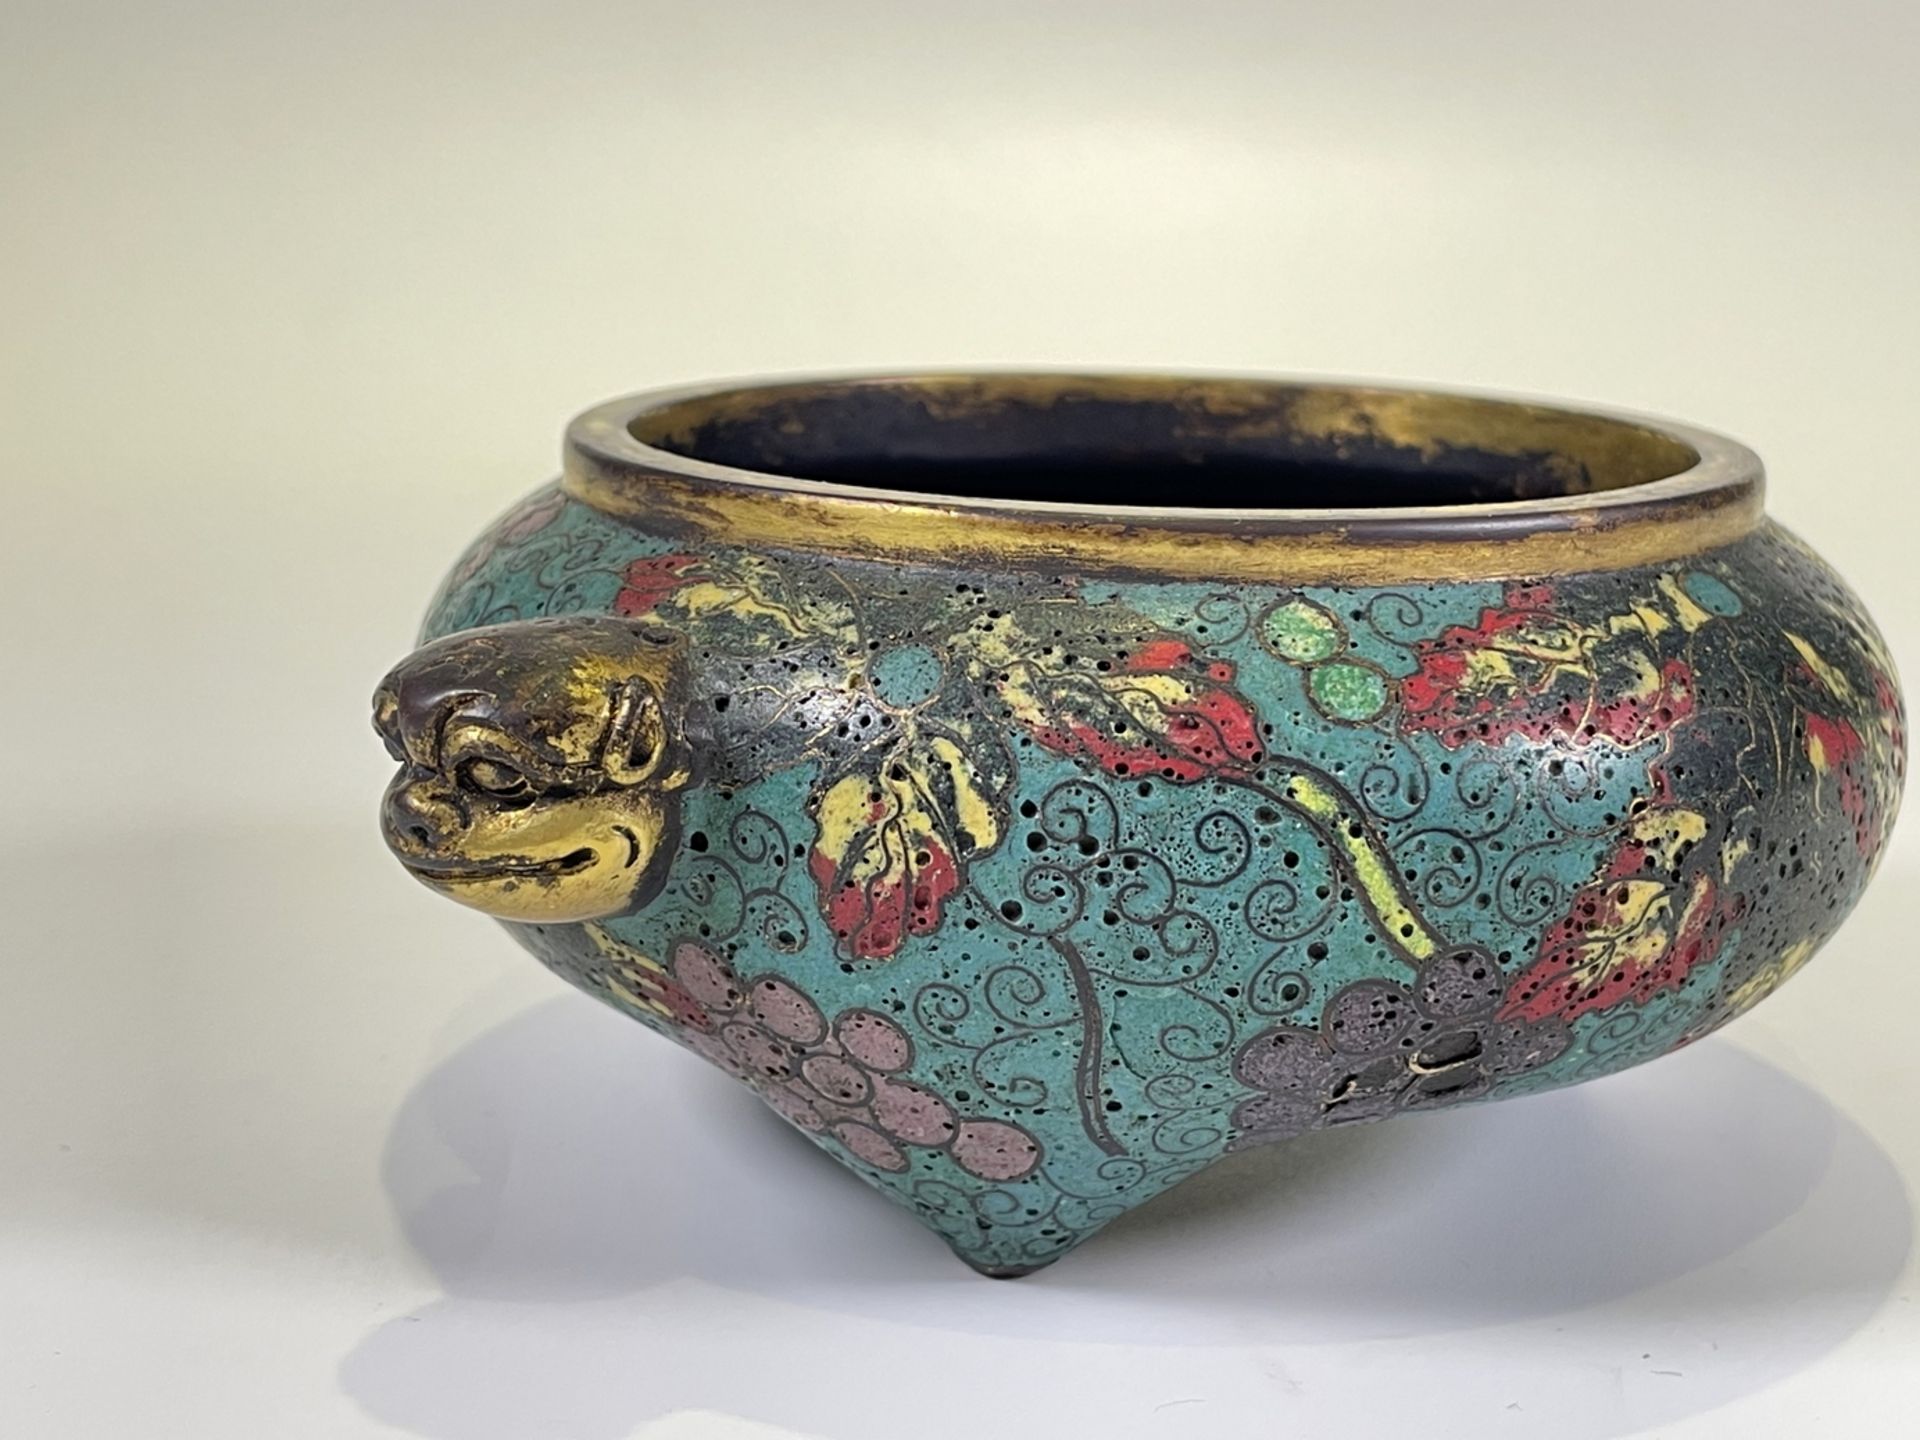 FINE CHINESE CLOISONNE, 17TH/18TH Century Pr.  Collection of NARA private gallary.  - Bild 3 aus 9